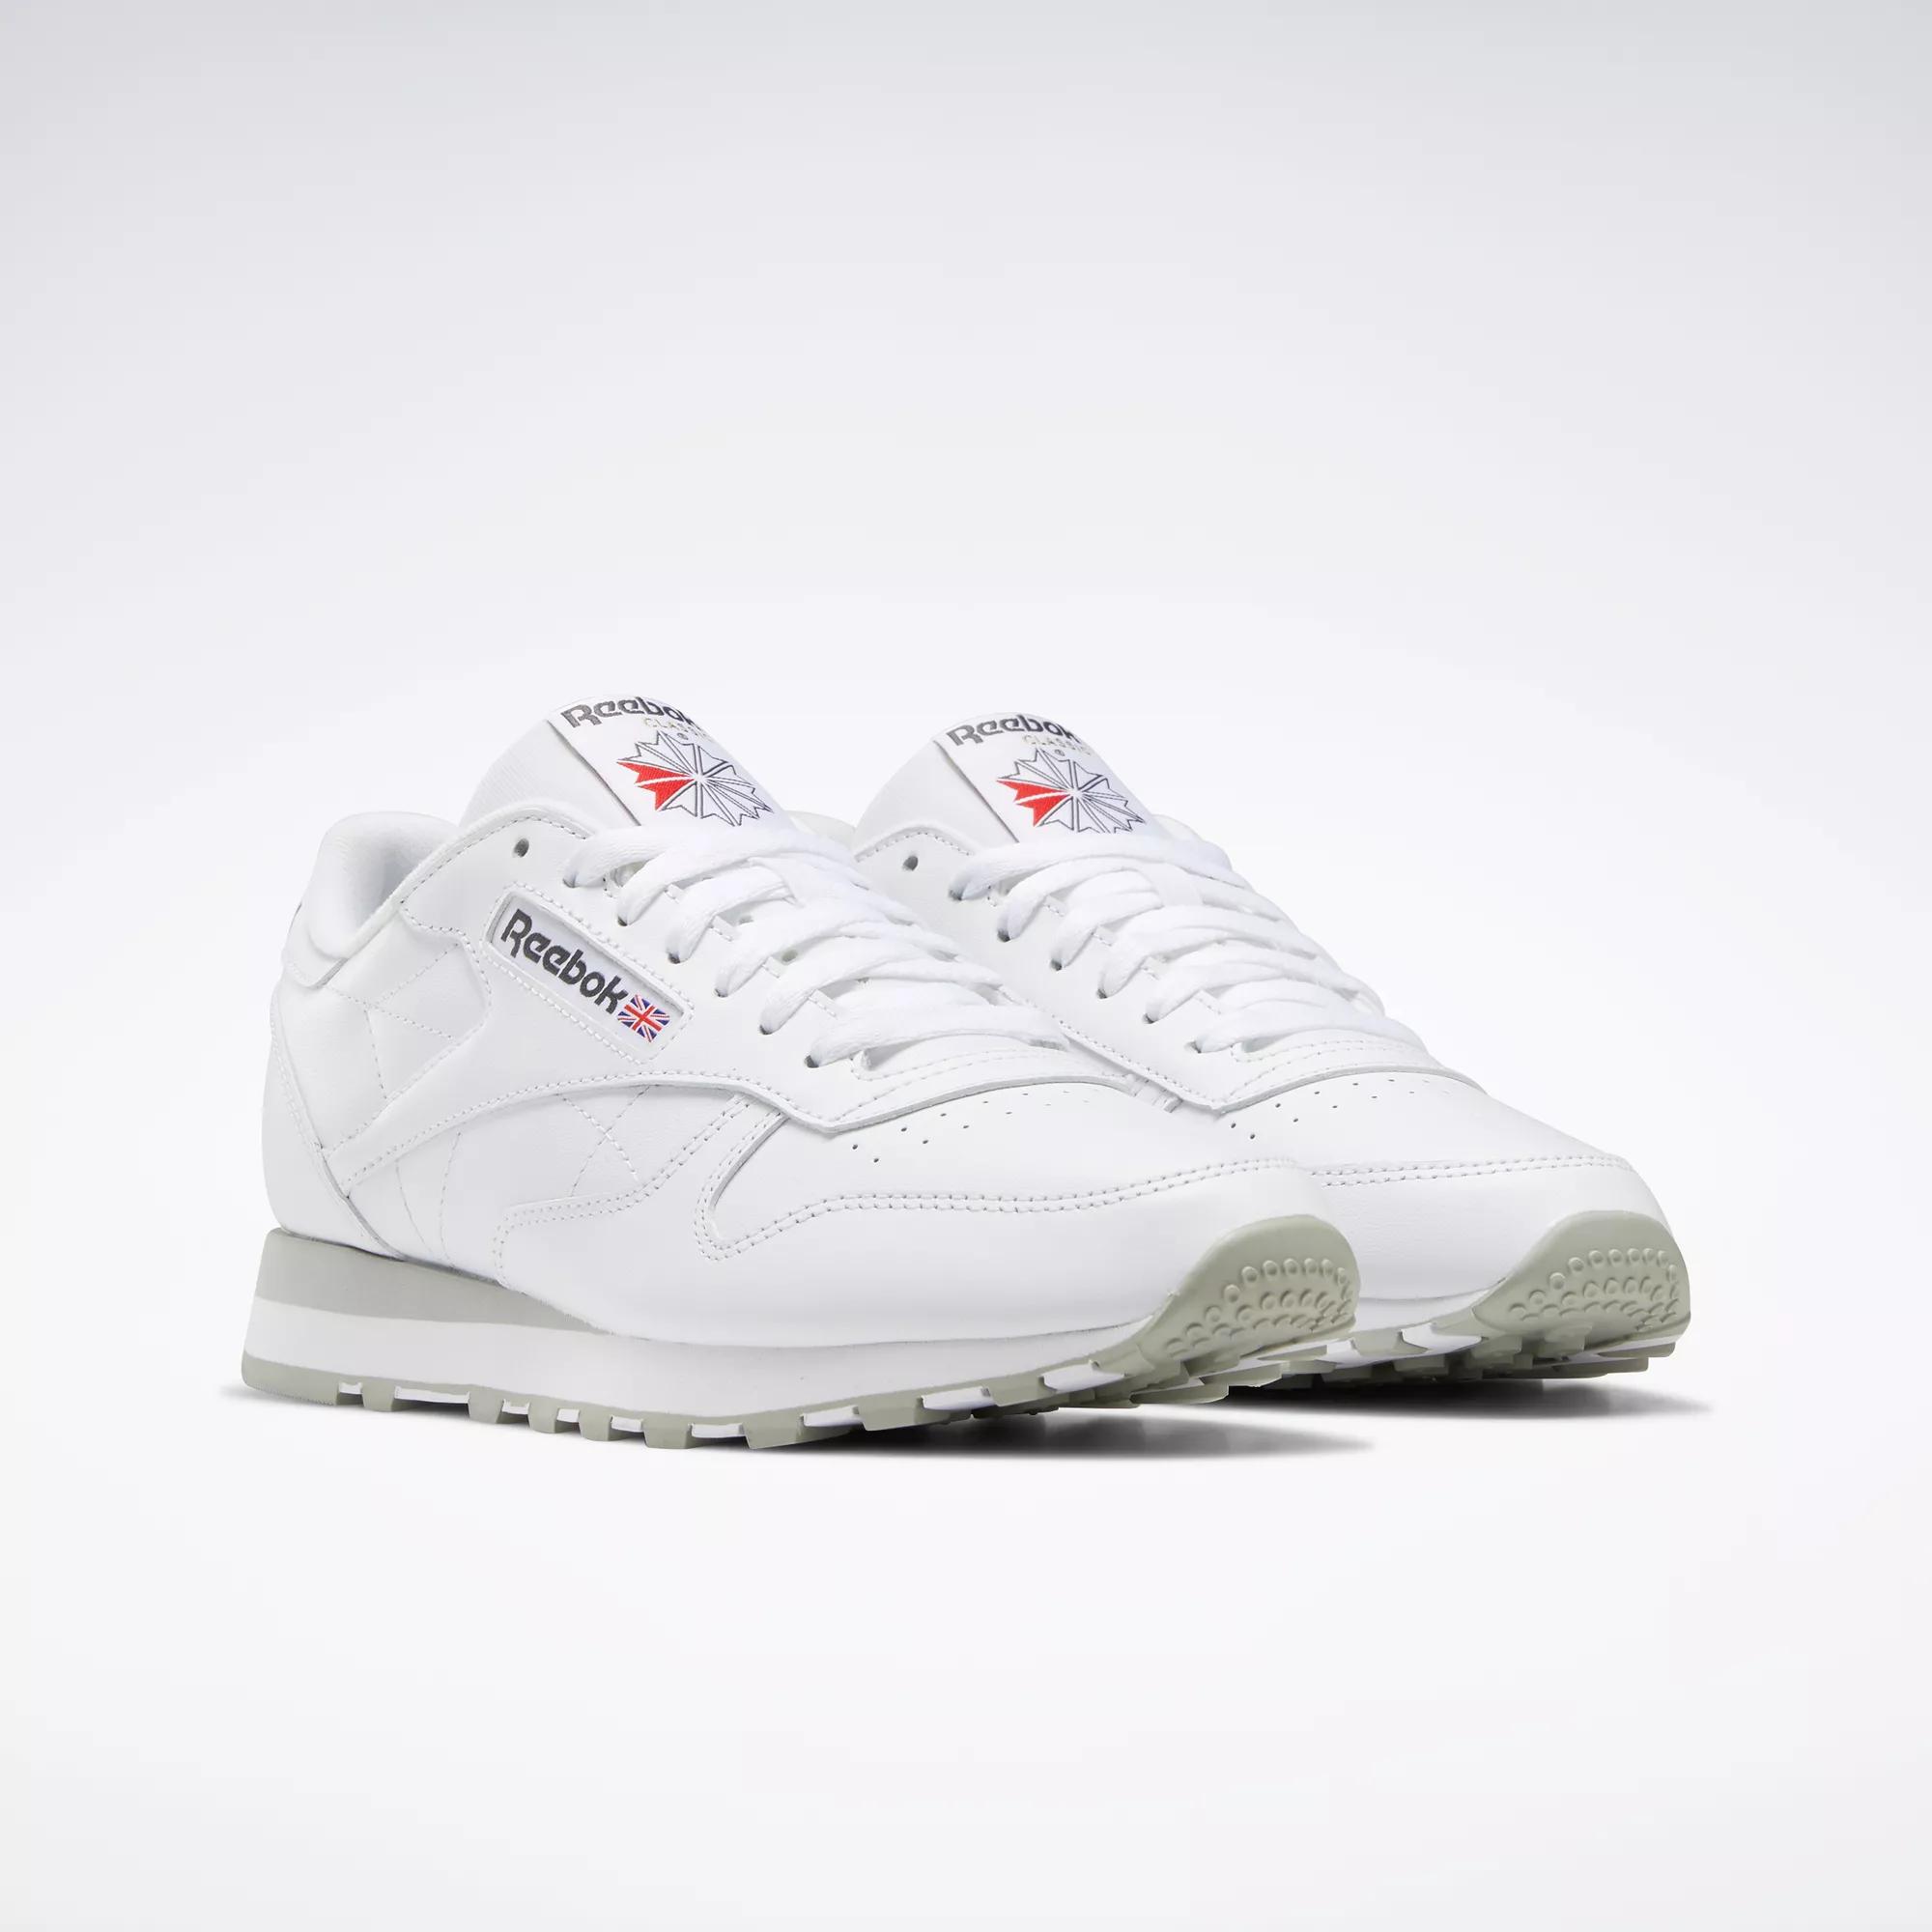 Classic Leather Shoes - Ftwr White / Pure Grey 3 / Grey 7 |